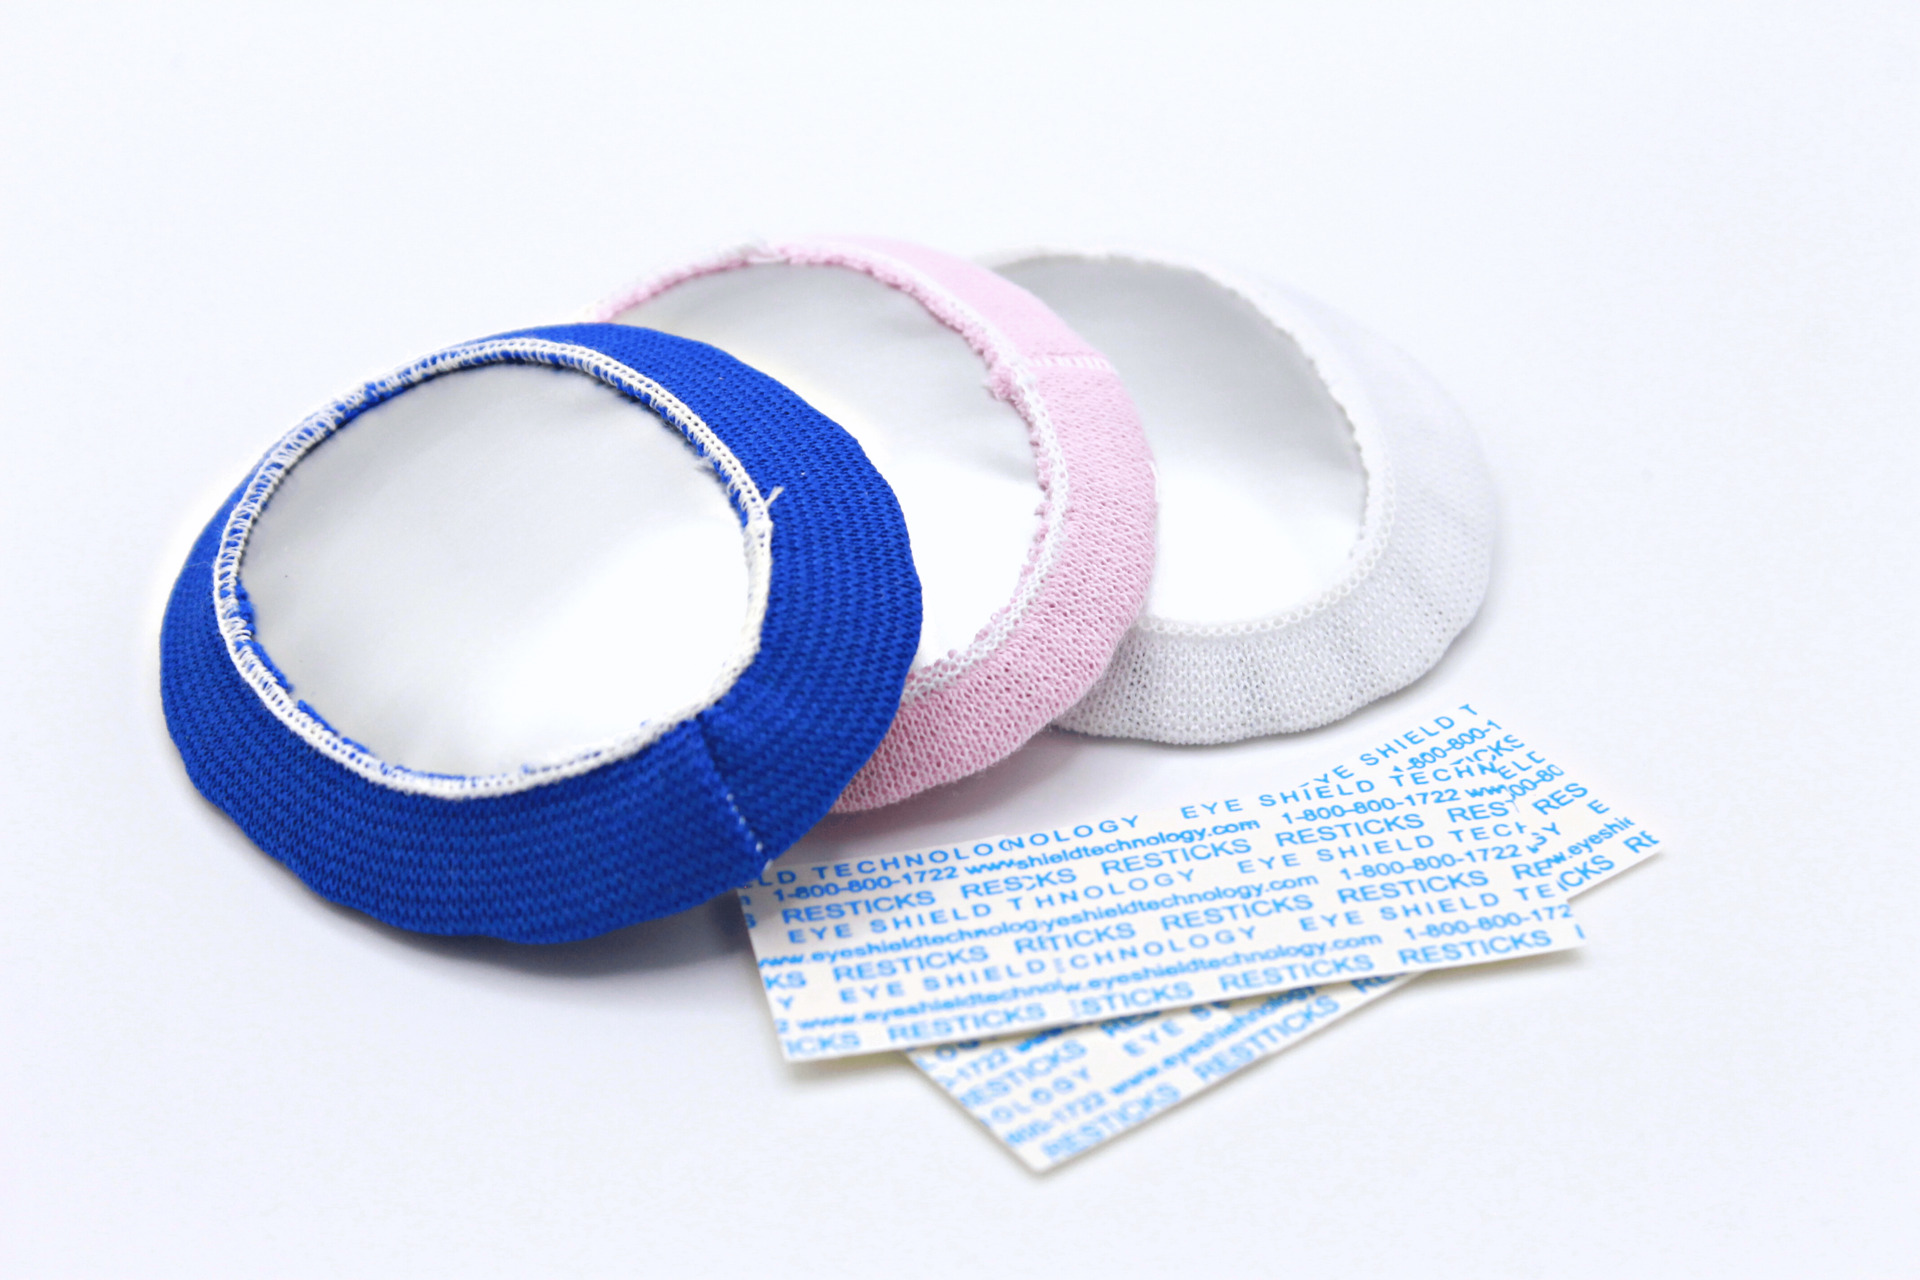 Who Carries Plastic White Eye Shields With Blue Garters